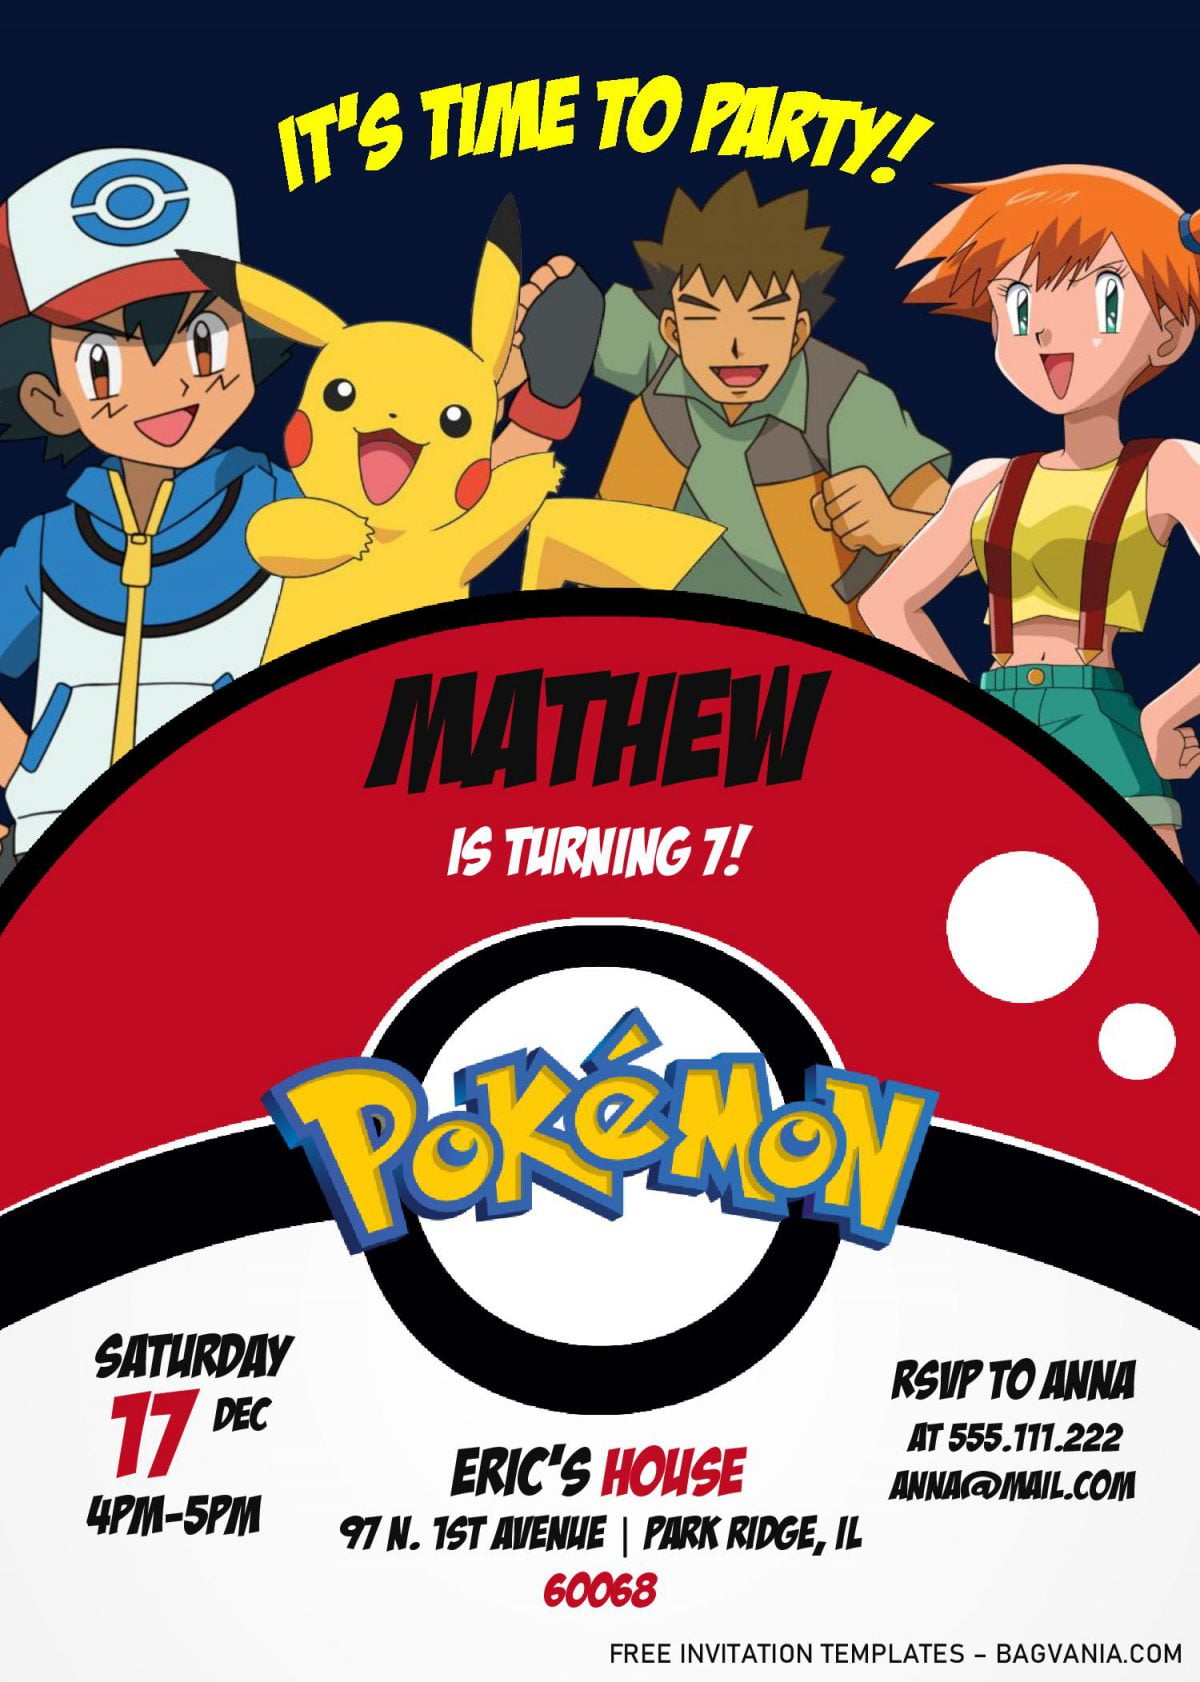 Pokemon Invitation Templates - Editable With MS Word and has ash and pikach...